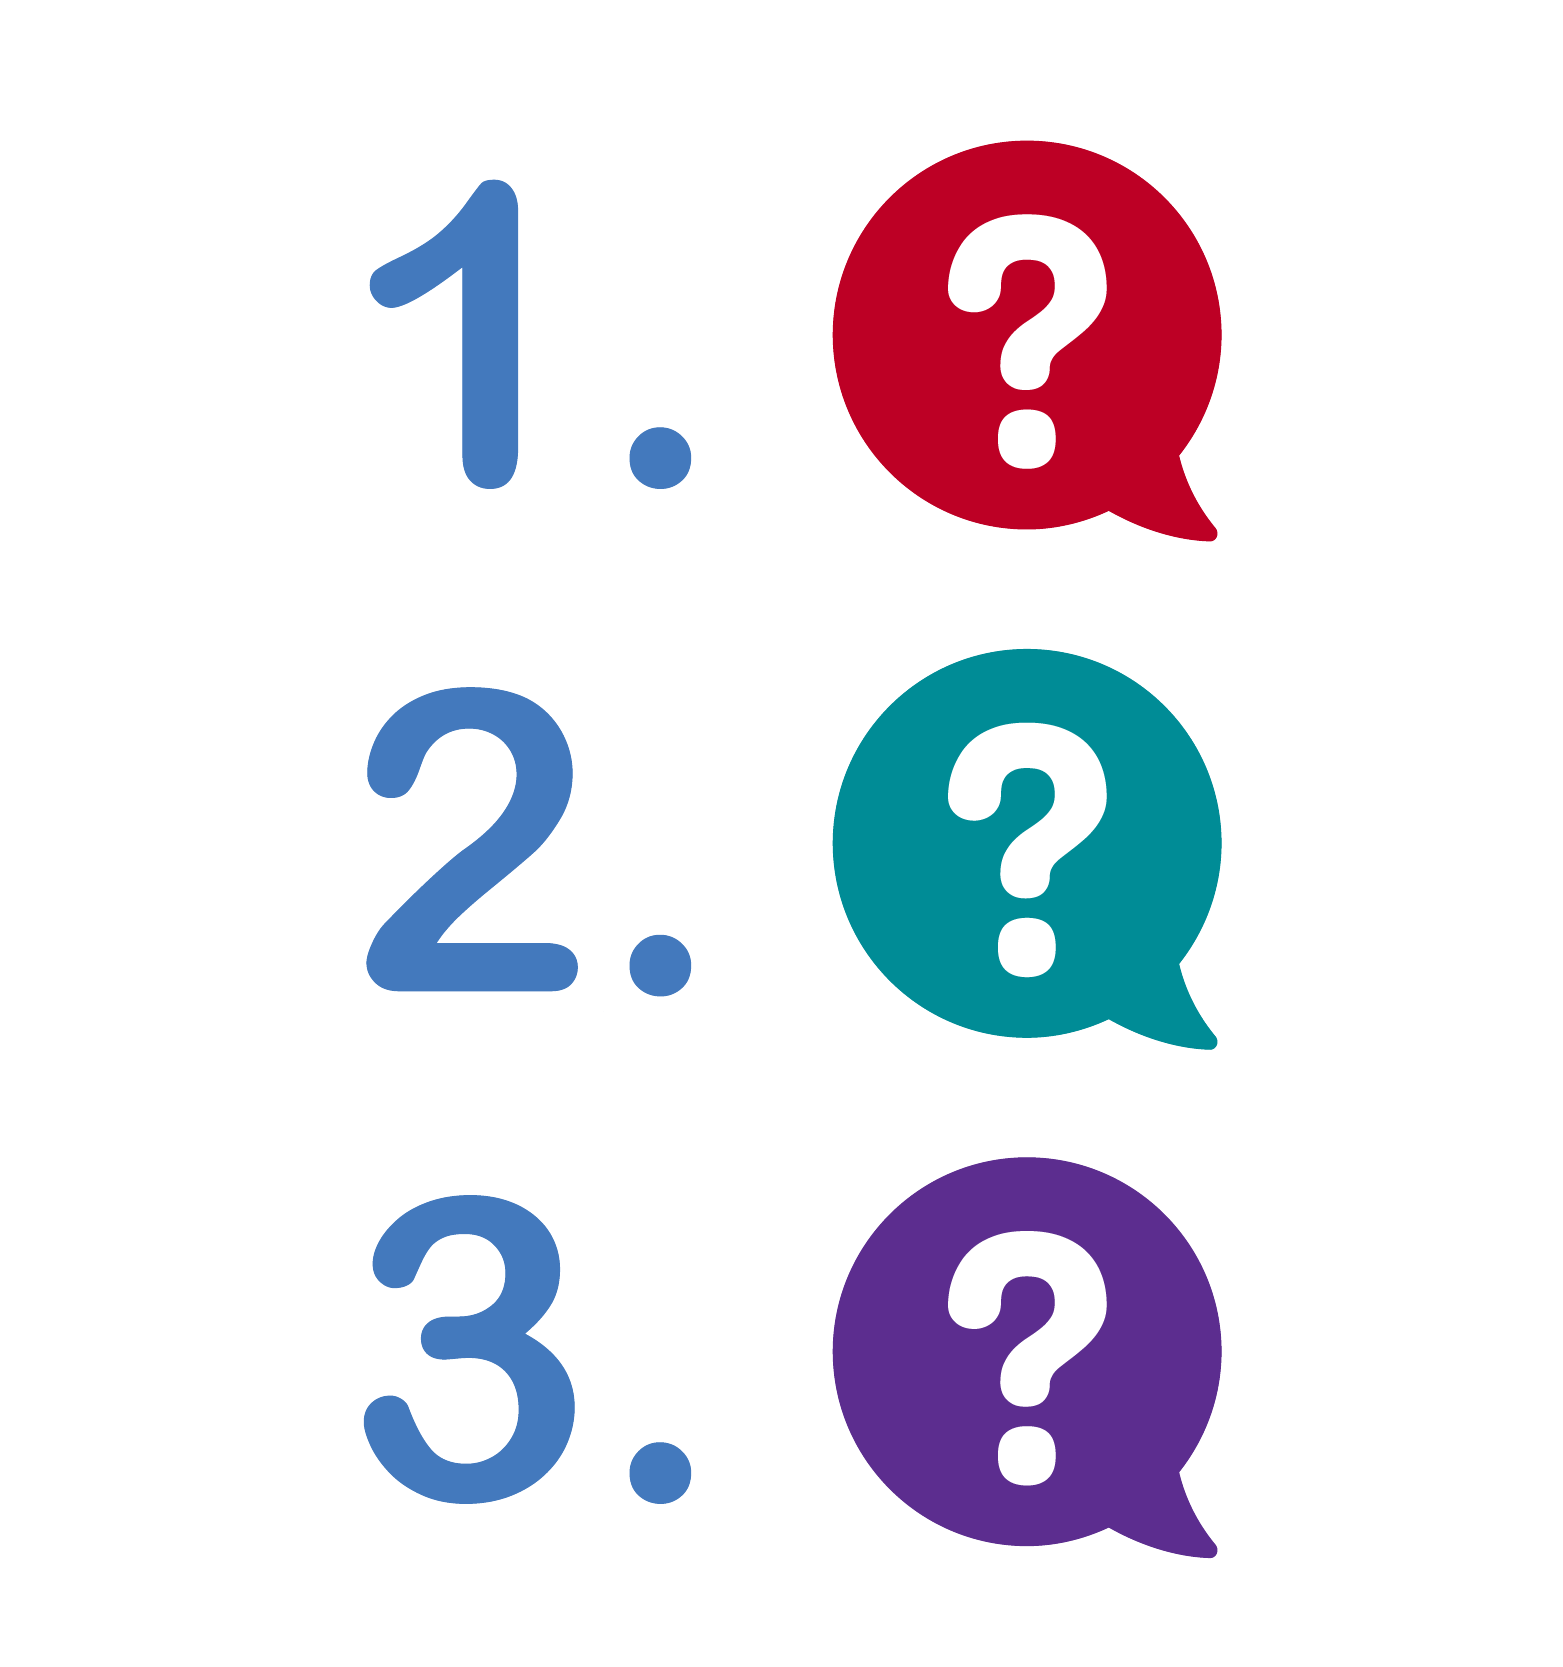  numbered list with question marks icon